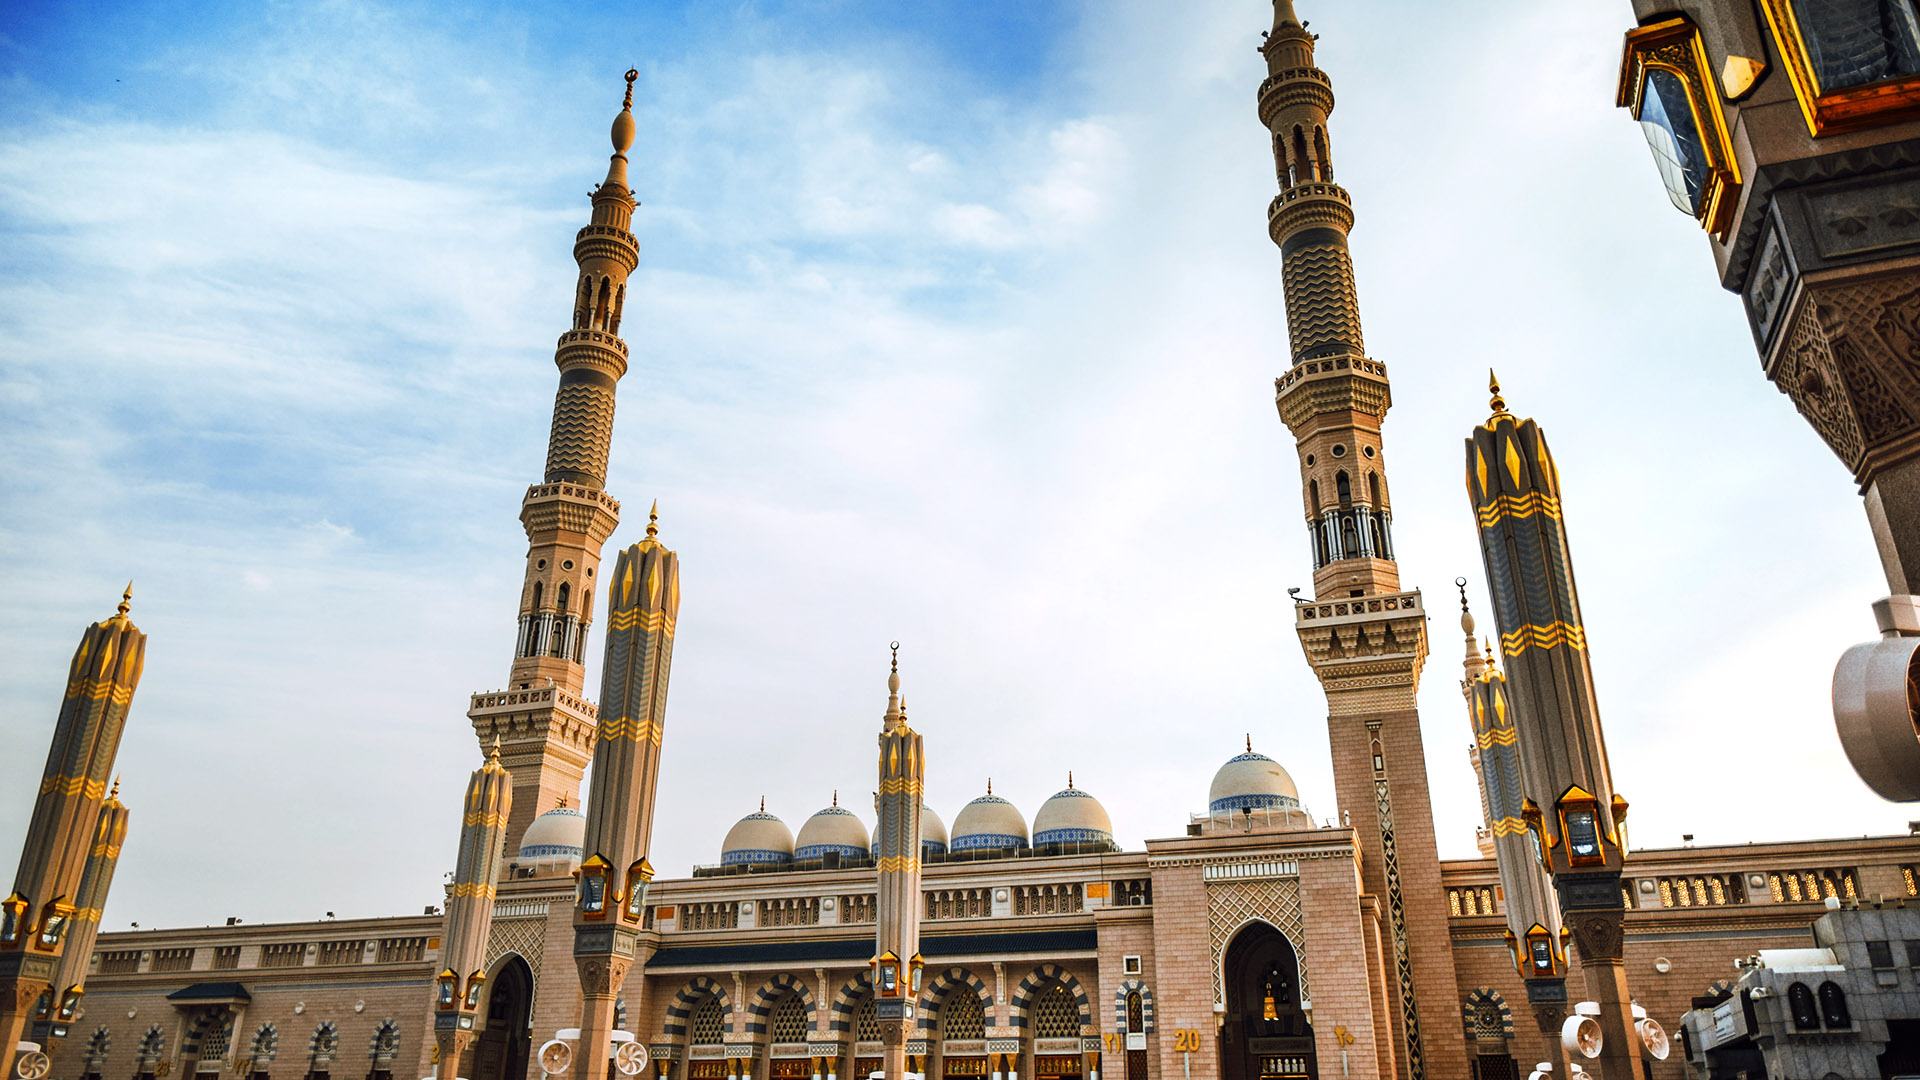 The most famous mosques in Makkah